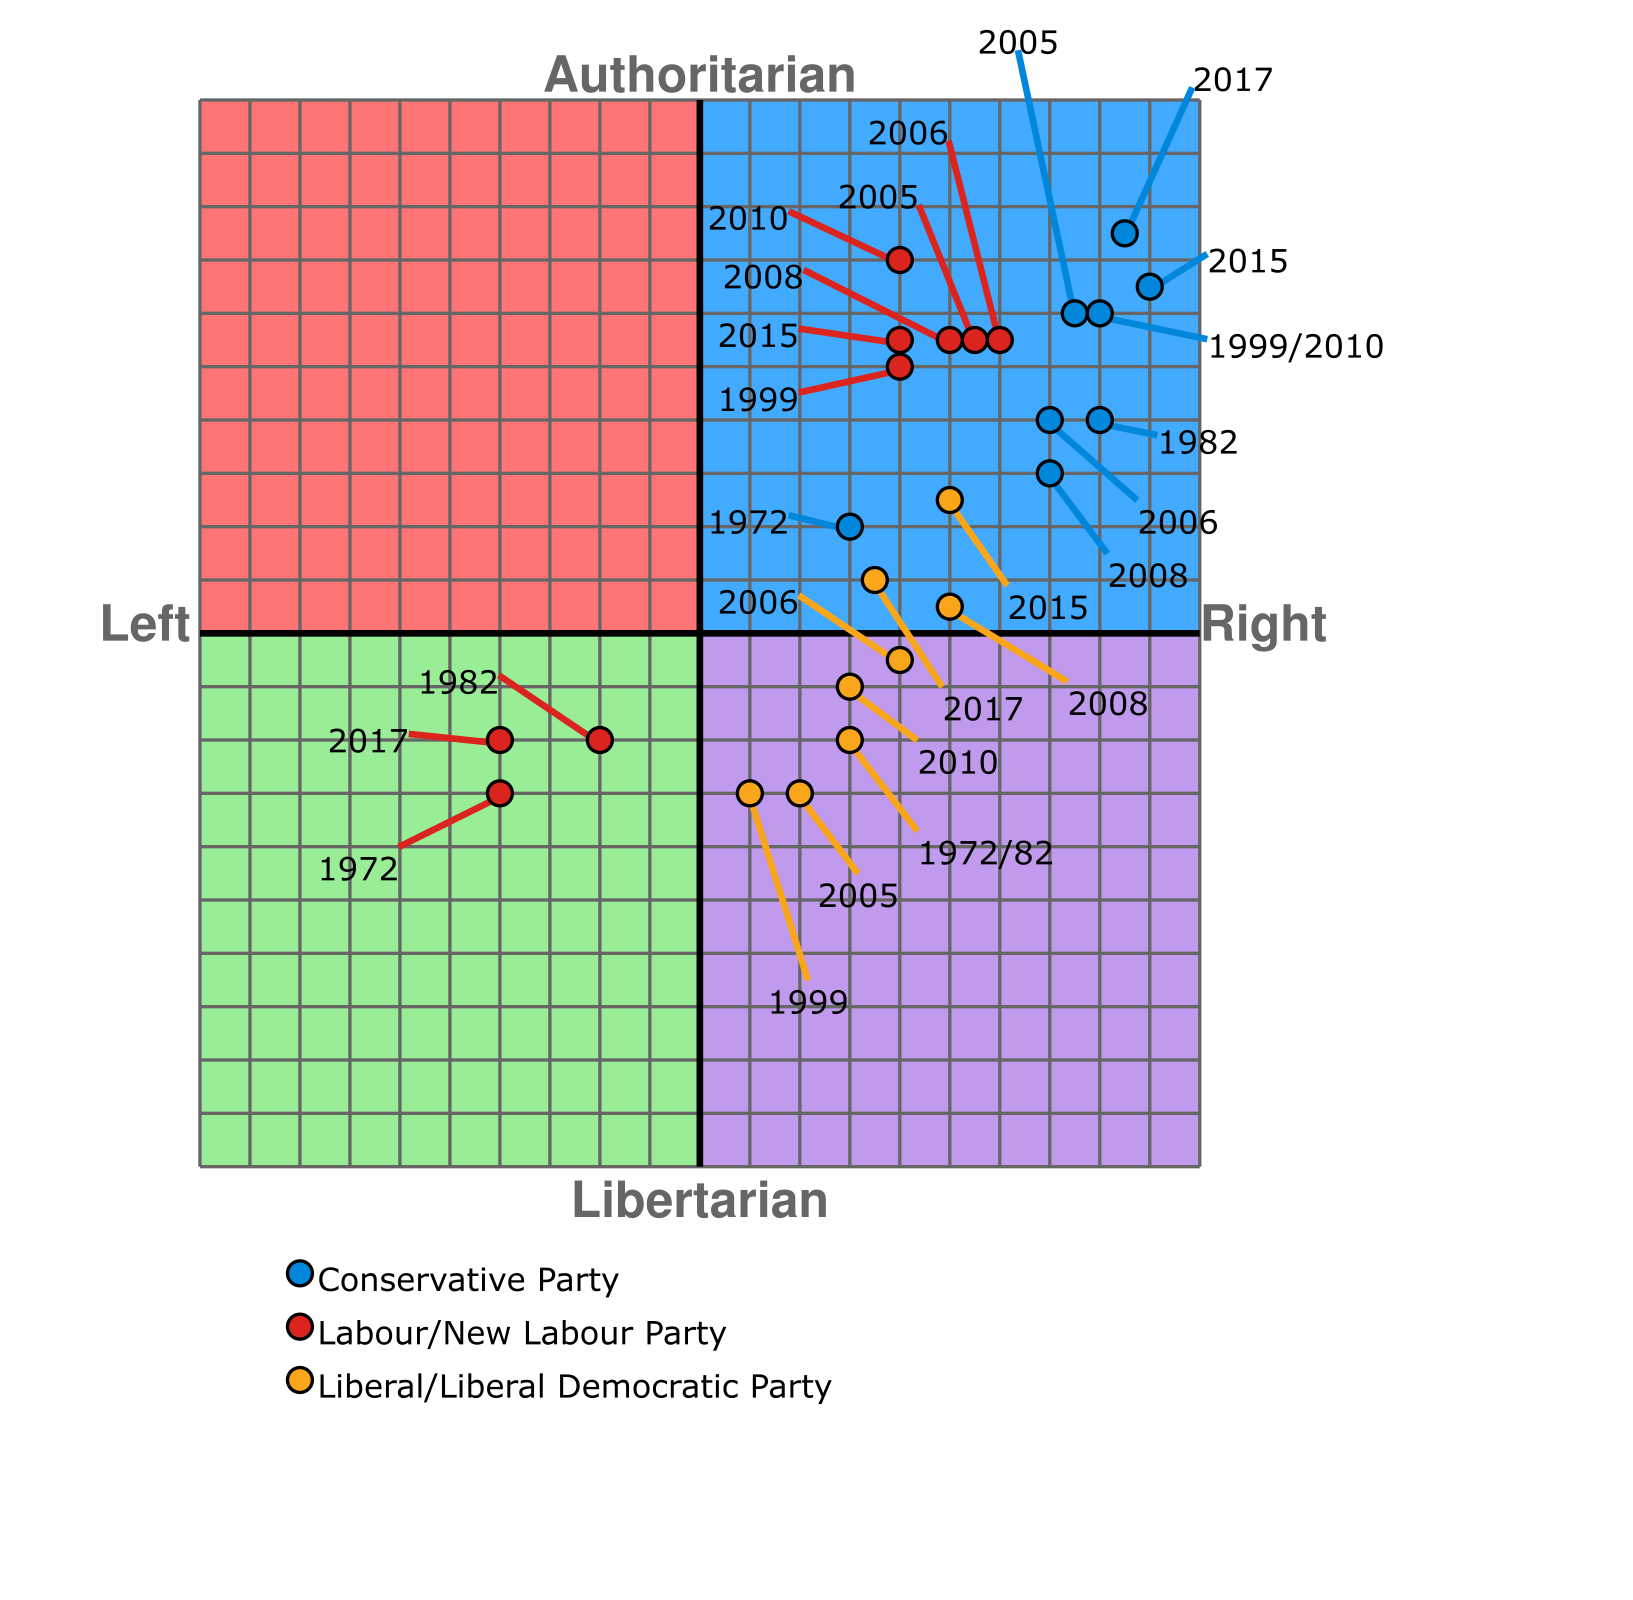 Political Compass chart showing the main UK parties at in different years, including Labour, Liberal Democrat and Conservative parties